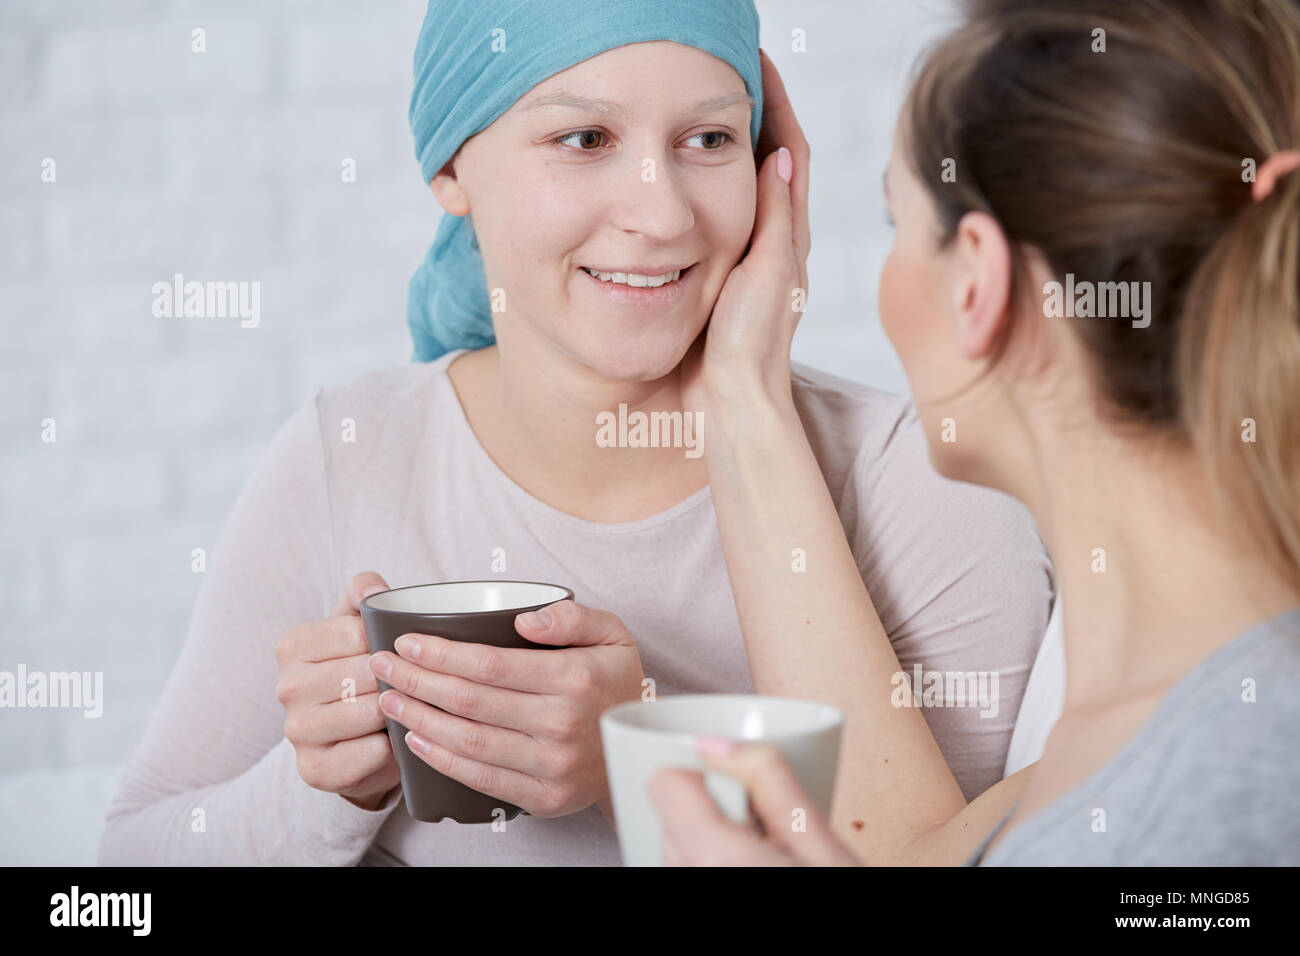 Woman supporting her ill sister, suffering from cancer Stock Photo